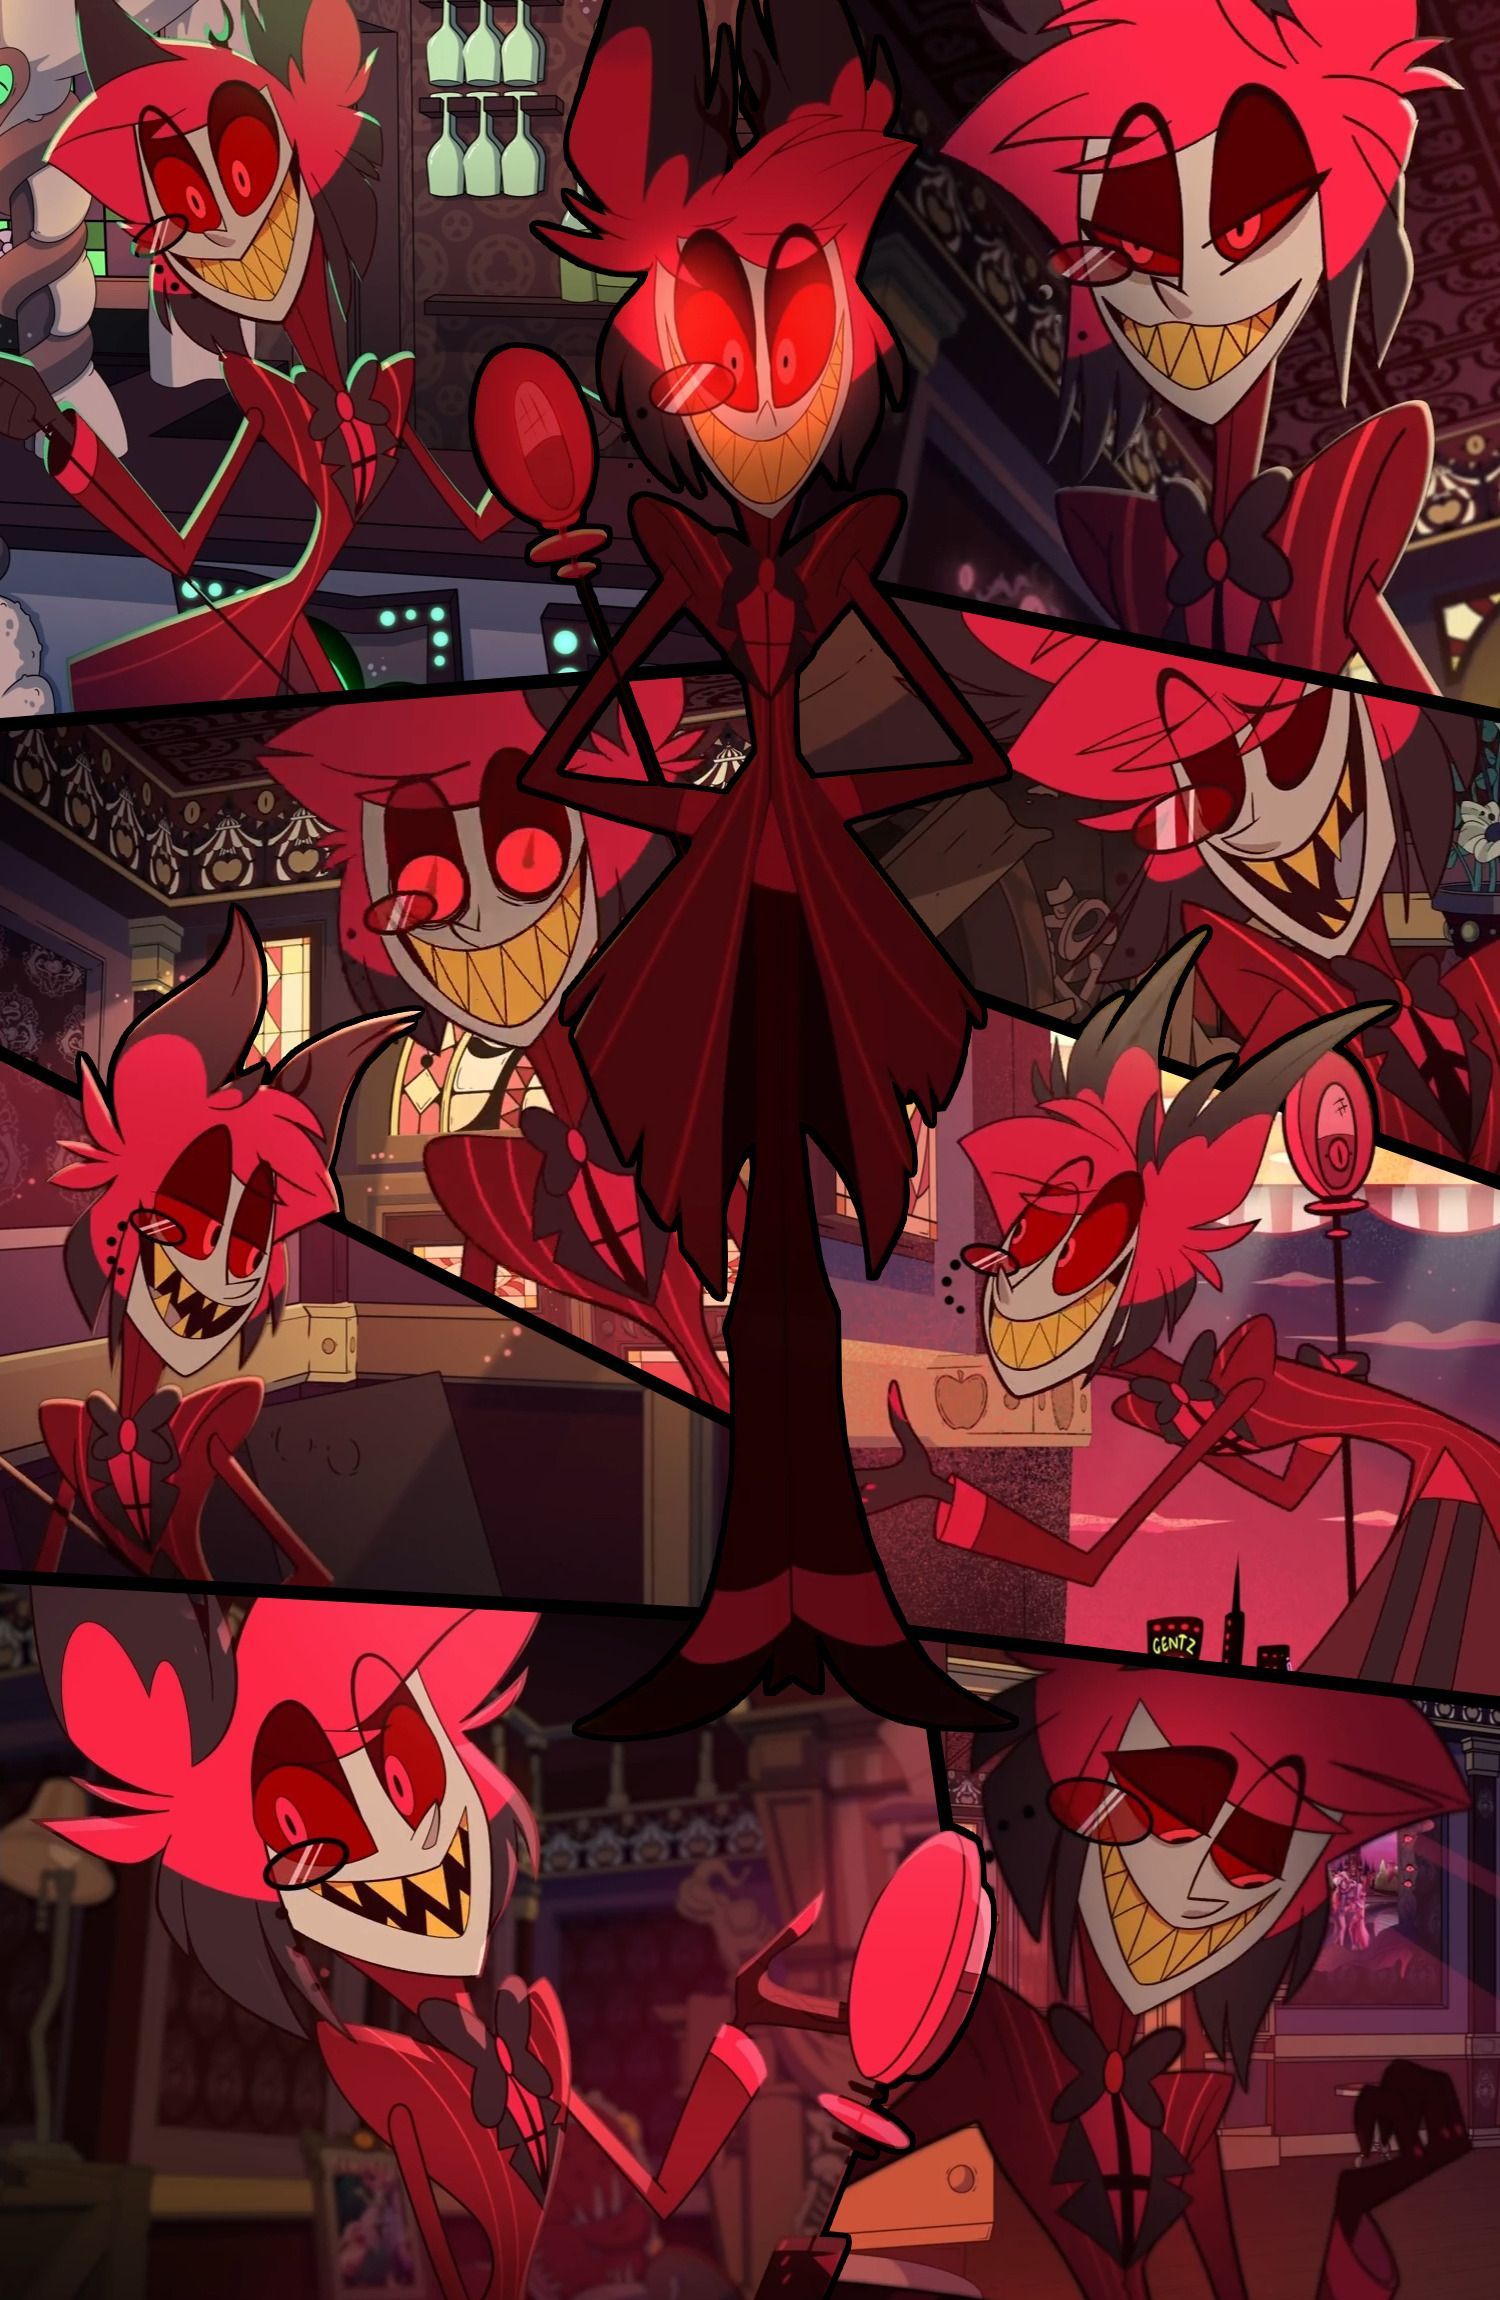 I wouldn't mind if Hazbin Hotel consisted only of Alastor speaking